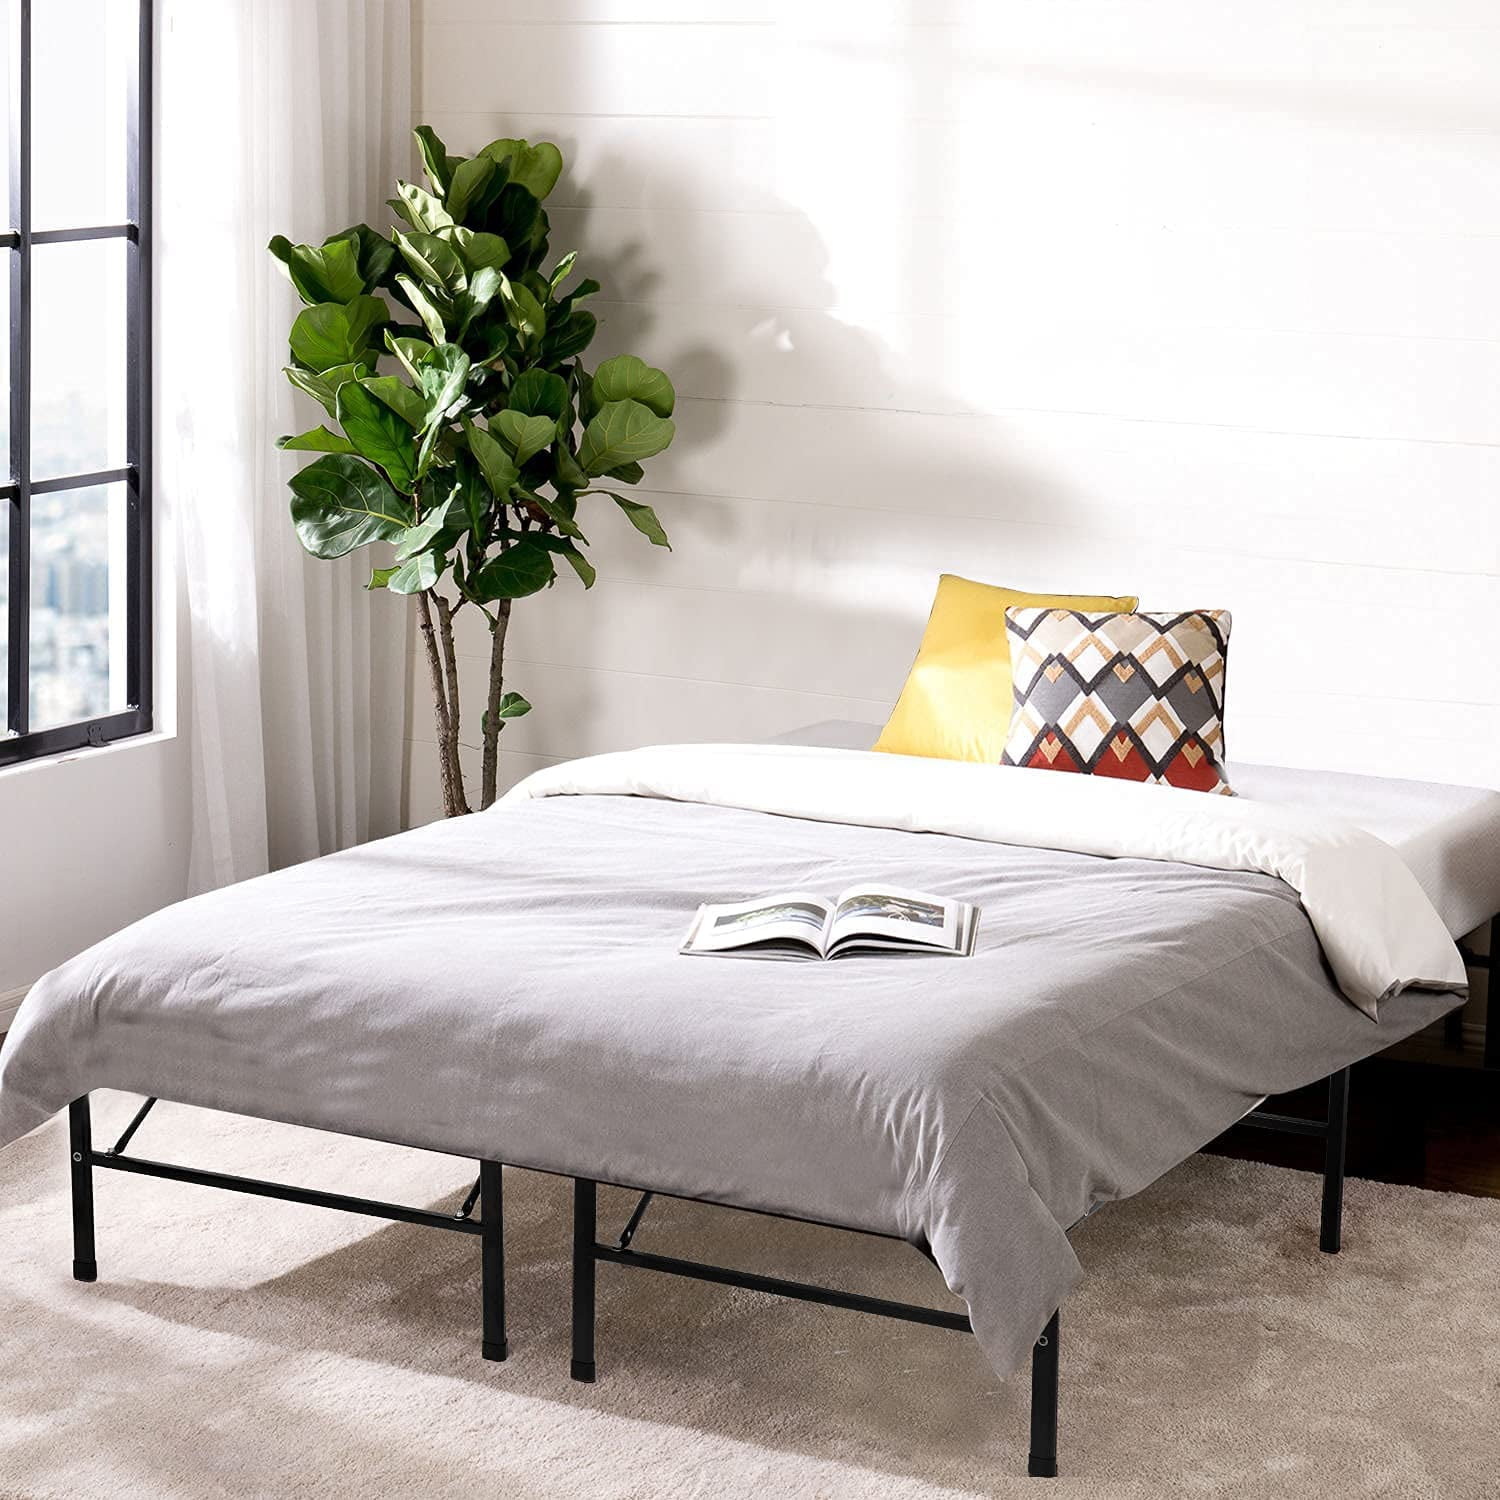 Platform Bed Frame Queen Metal Base, What Type Of Bed Frame Do I Need For A Memory Foam Mattress